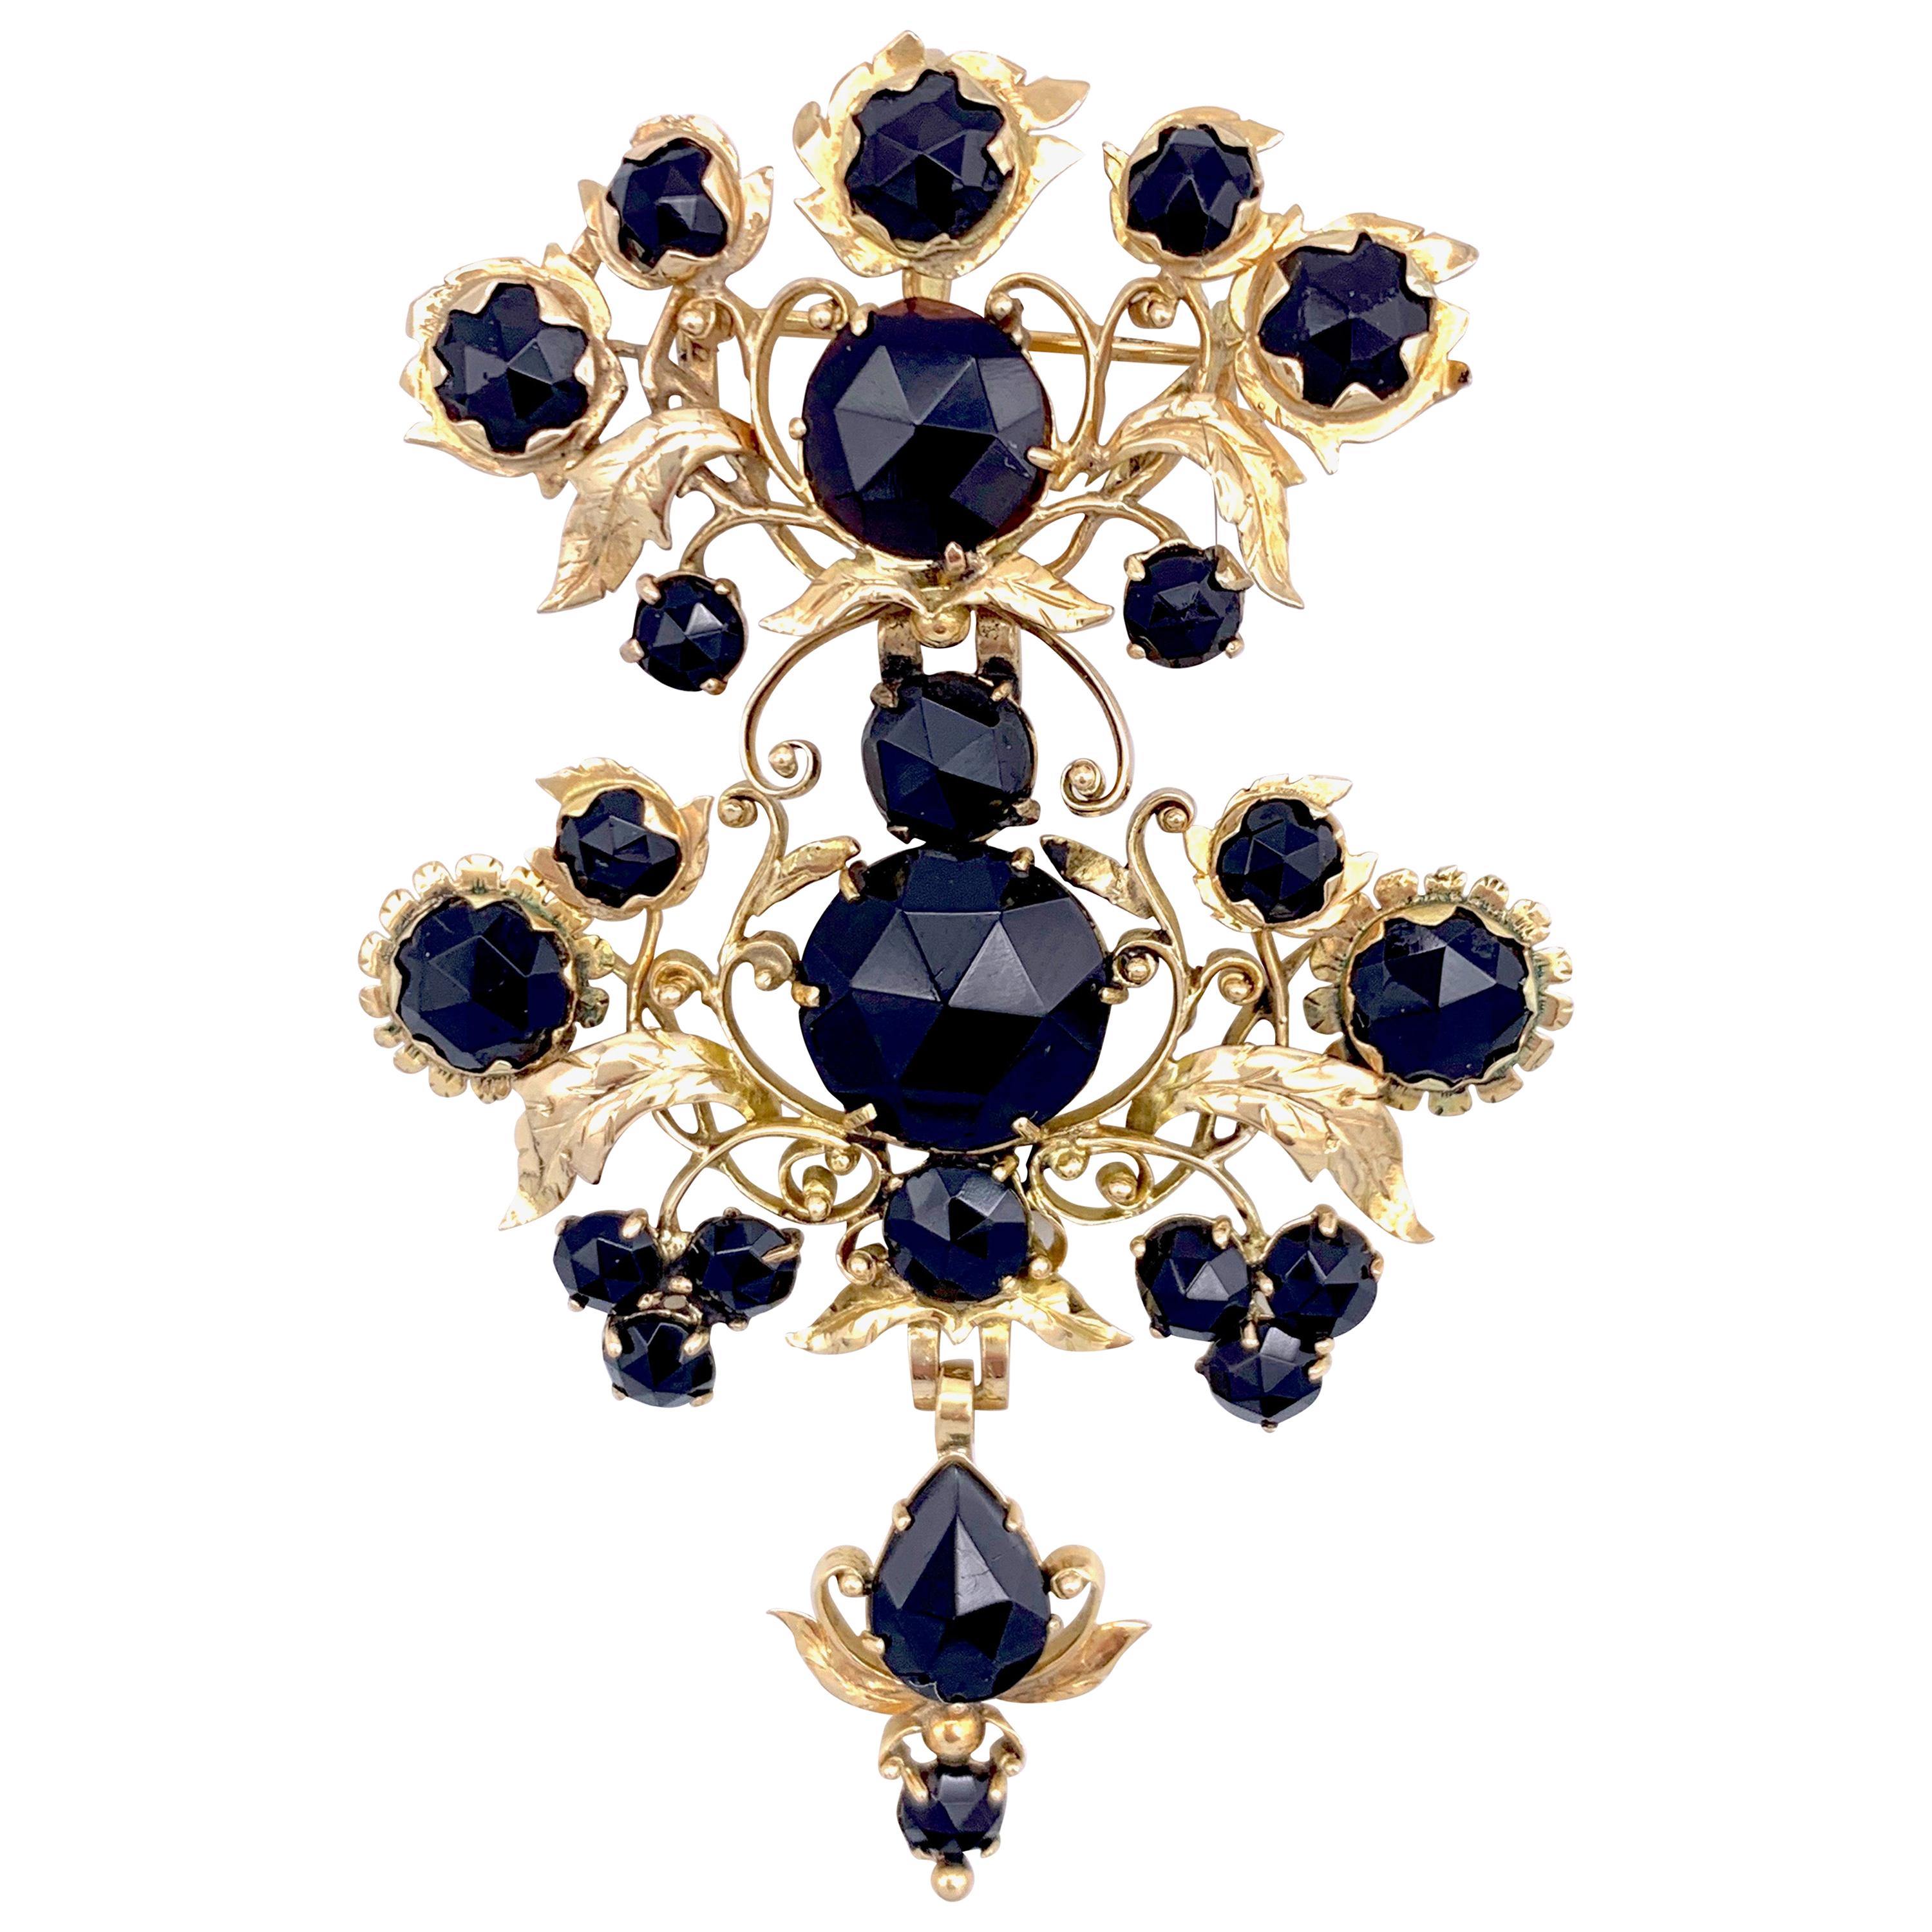 This beautiful mid-18th century piece of jewellery has been executed in 14 carat gold and is set with facetted onyx .